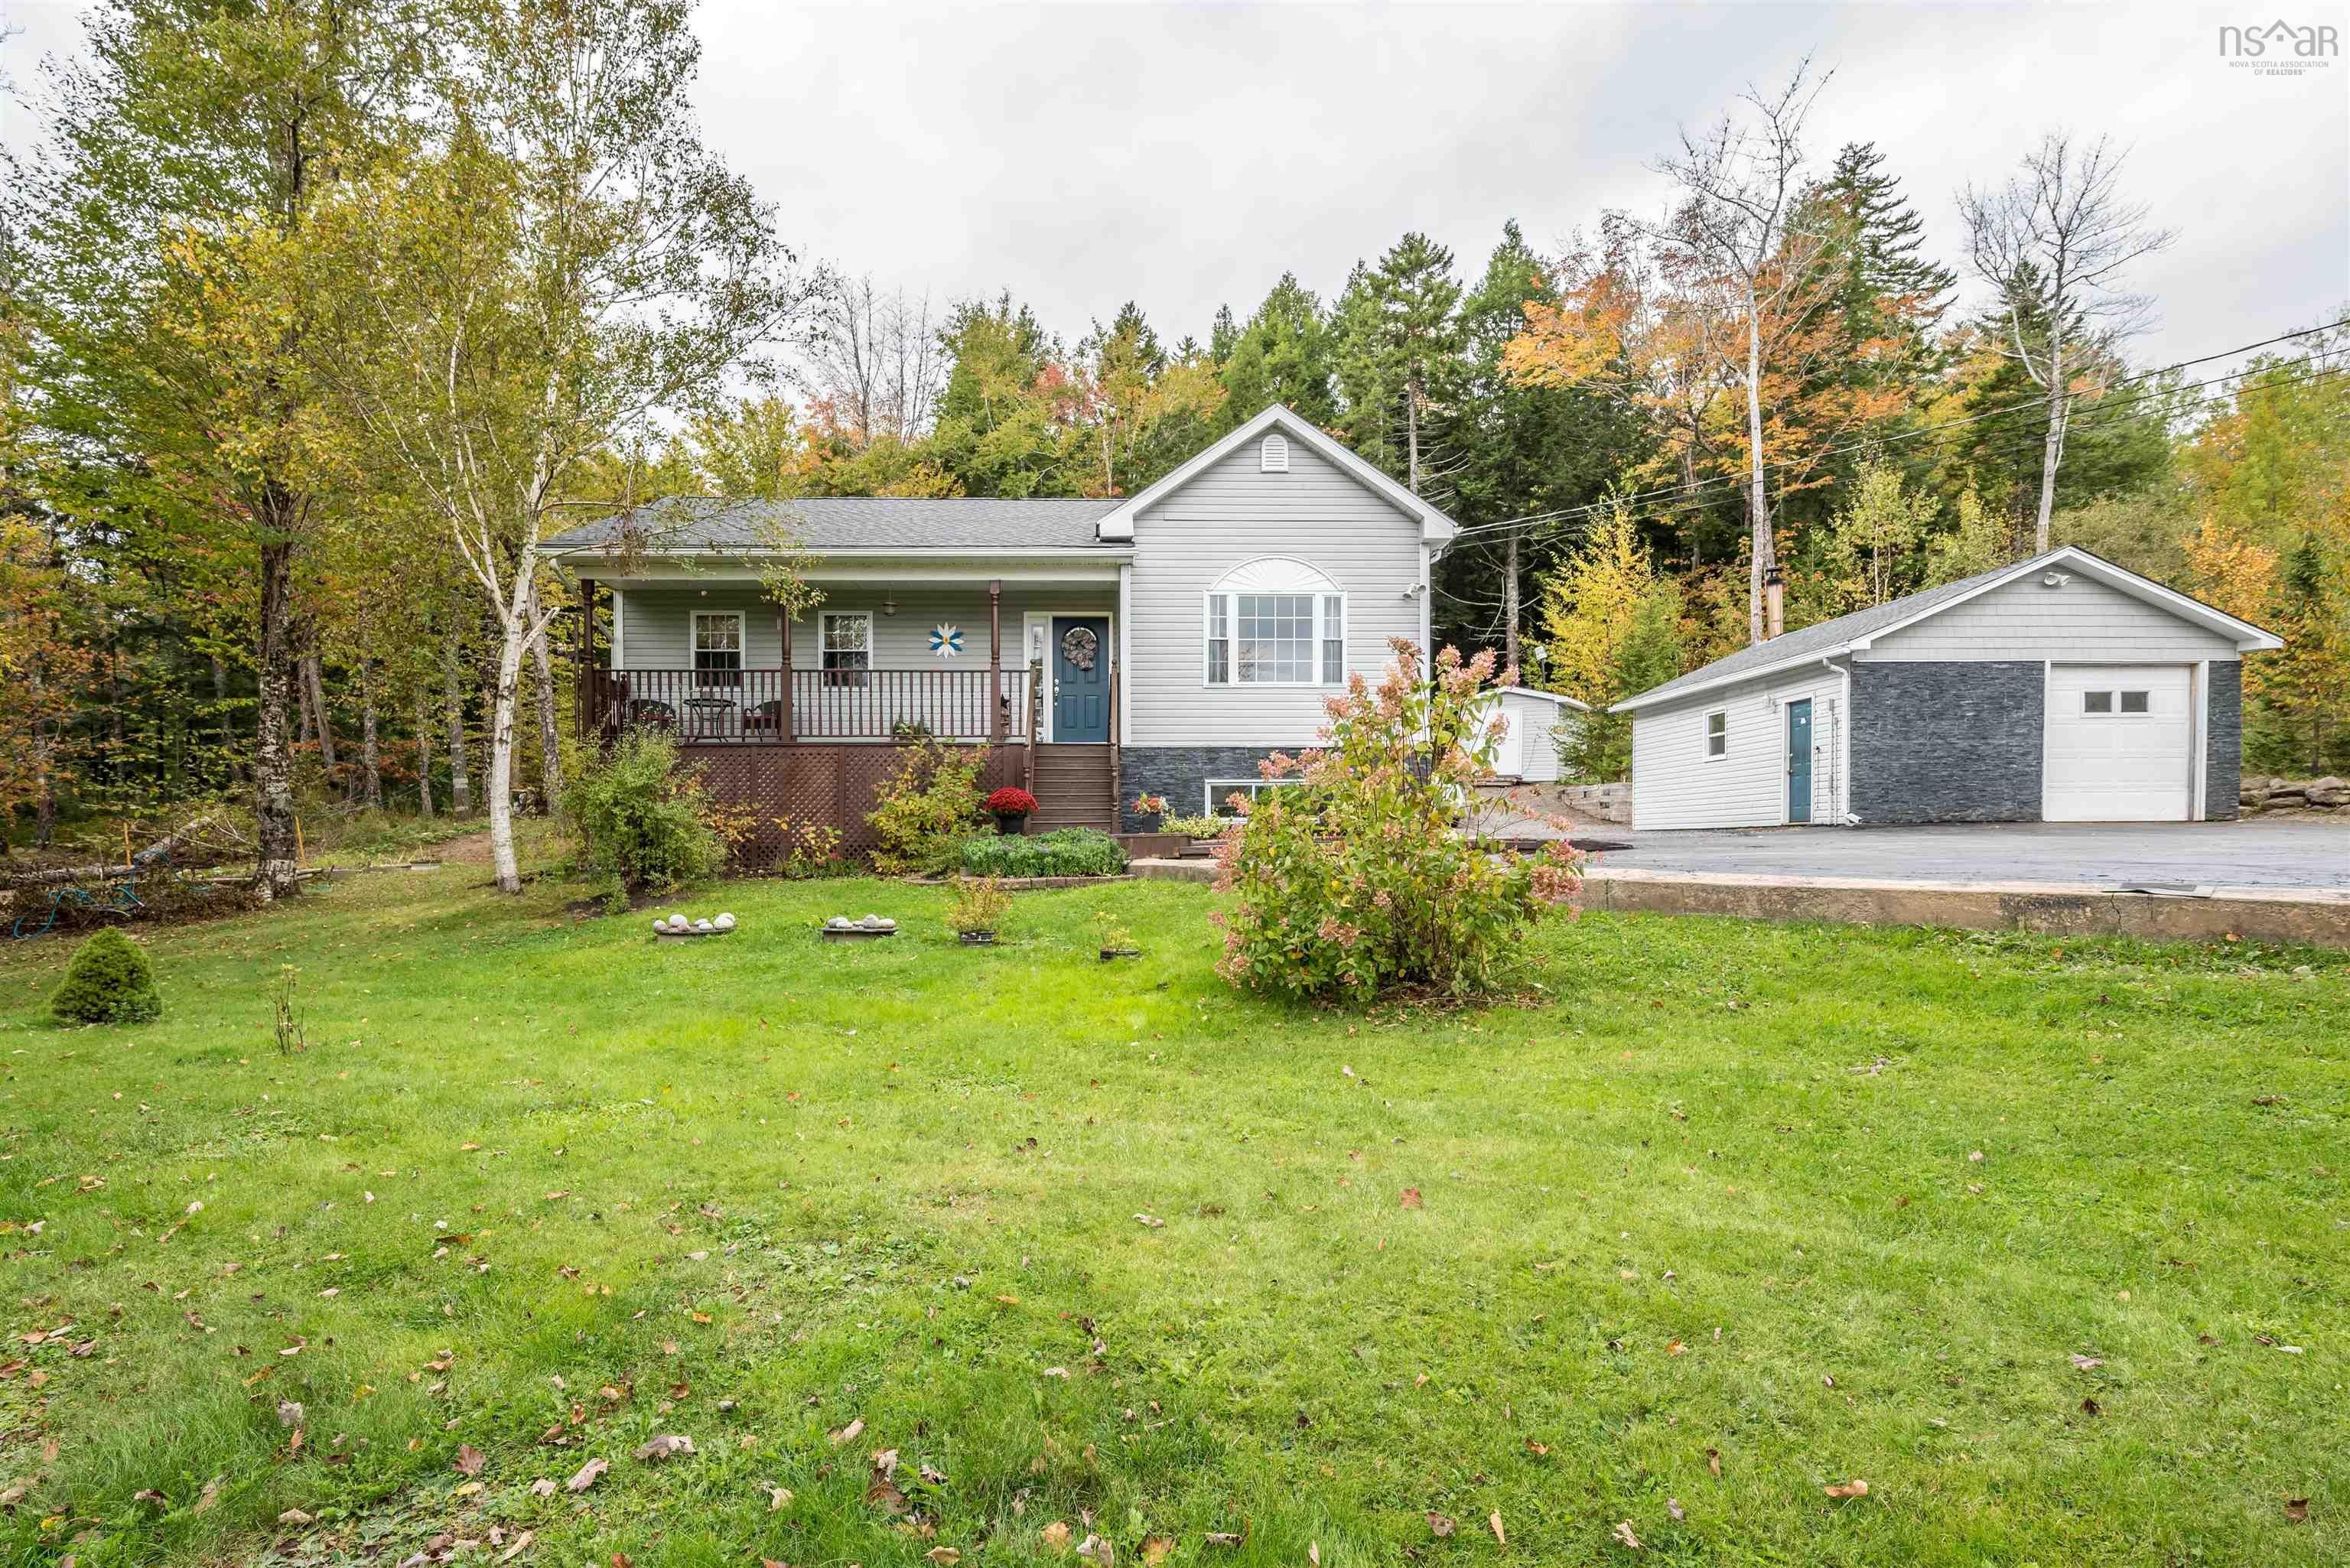 Main Photo: 110 SILVER LEAF Drive in Beaver Bank: 26-Beaverbank, Upper Sackville Residential for sale (Halifax-Dartmouth)  : MLS®# 202224070